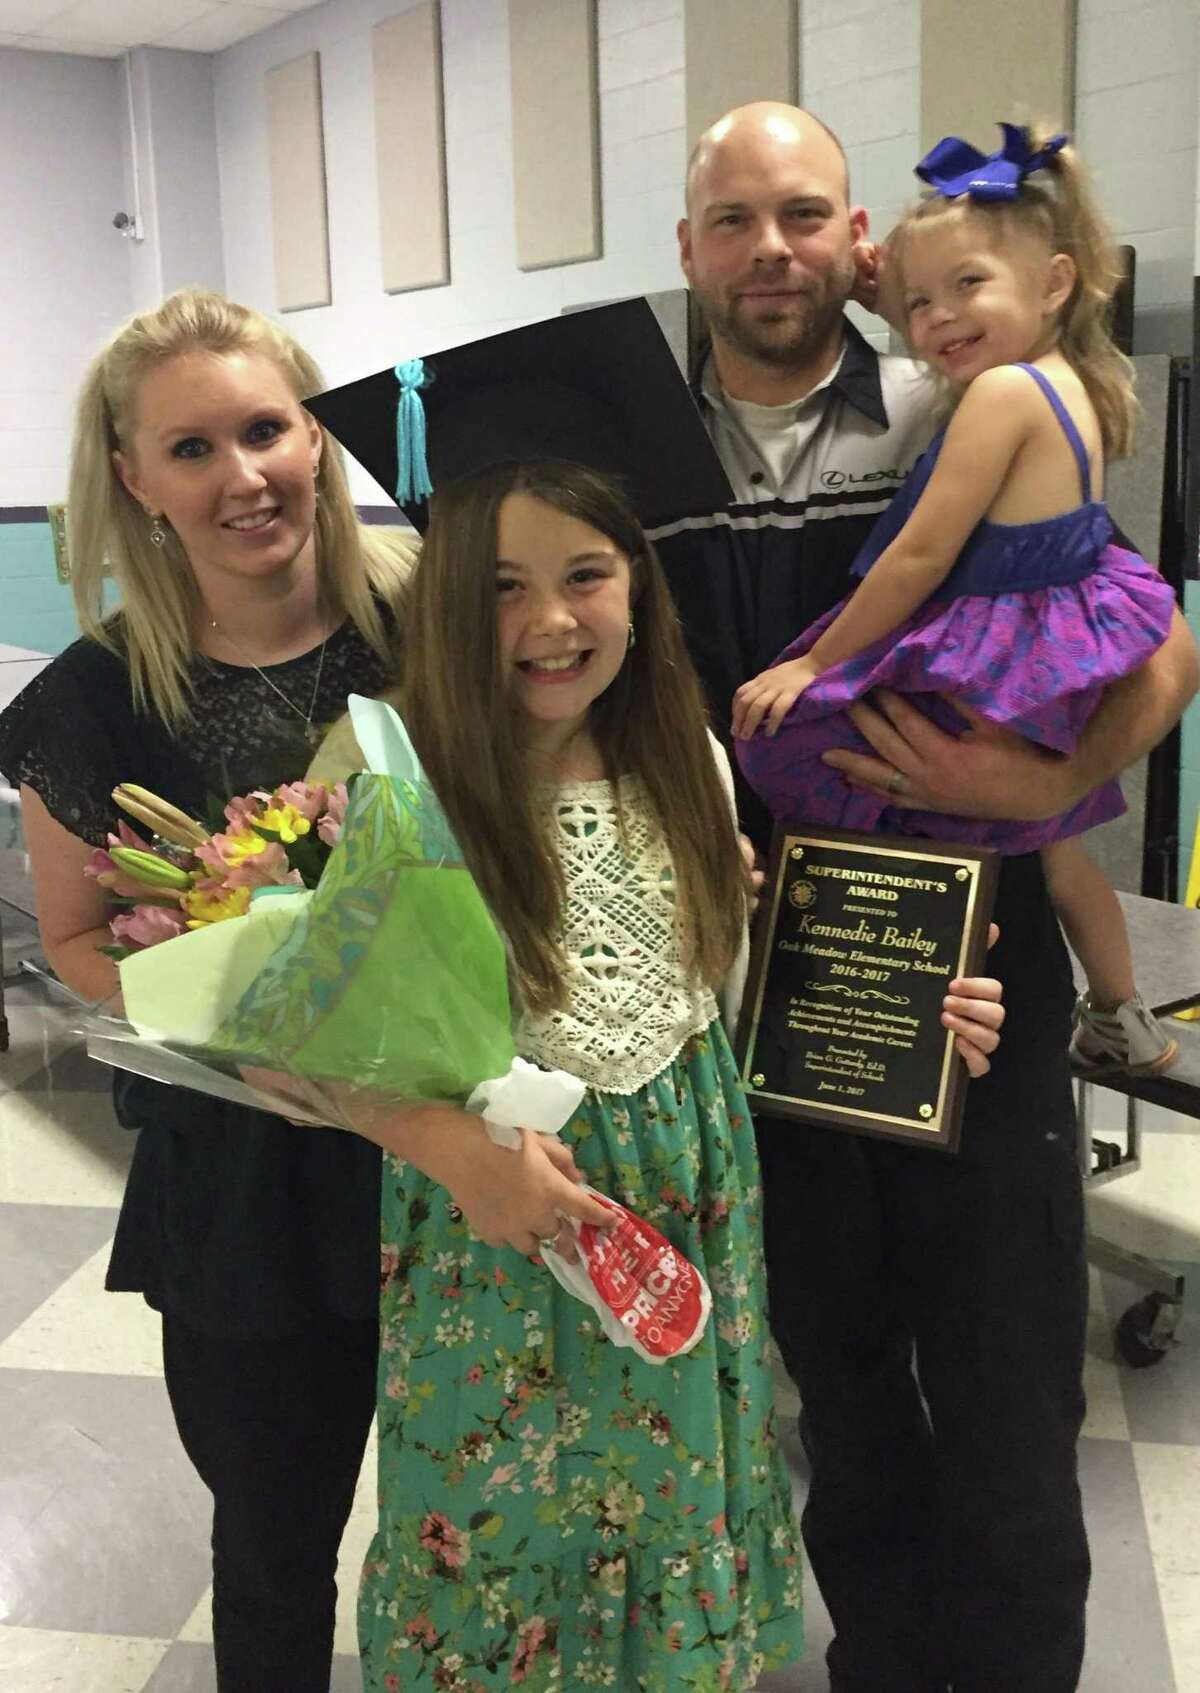 Kennedie Bailey poses with her mother, Lindsey Bendele, her stepfather, Chris Bendele, and her sister, Presley, 4, before starting chemotherapy over the summer. Kennedie was diagnosed with rhabdomyosarcoma, a form of cancer that develops from connective tissues in the body including, muscles, bones, joints and fat.